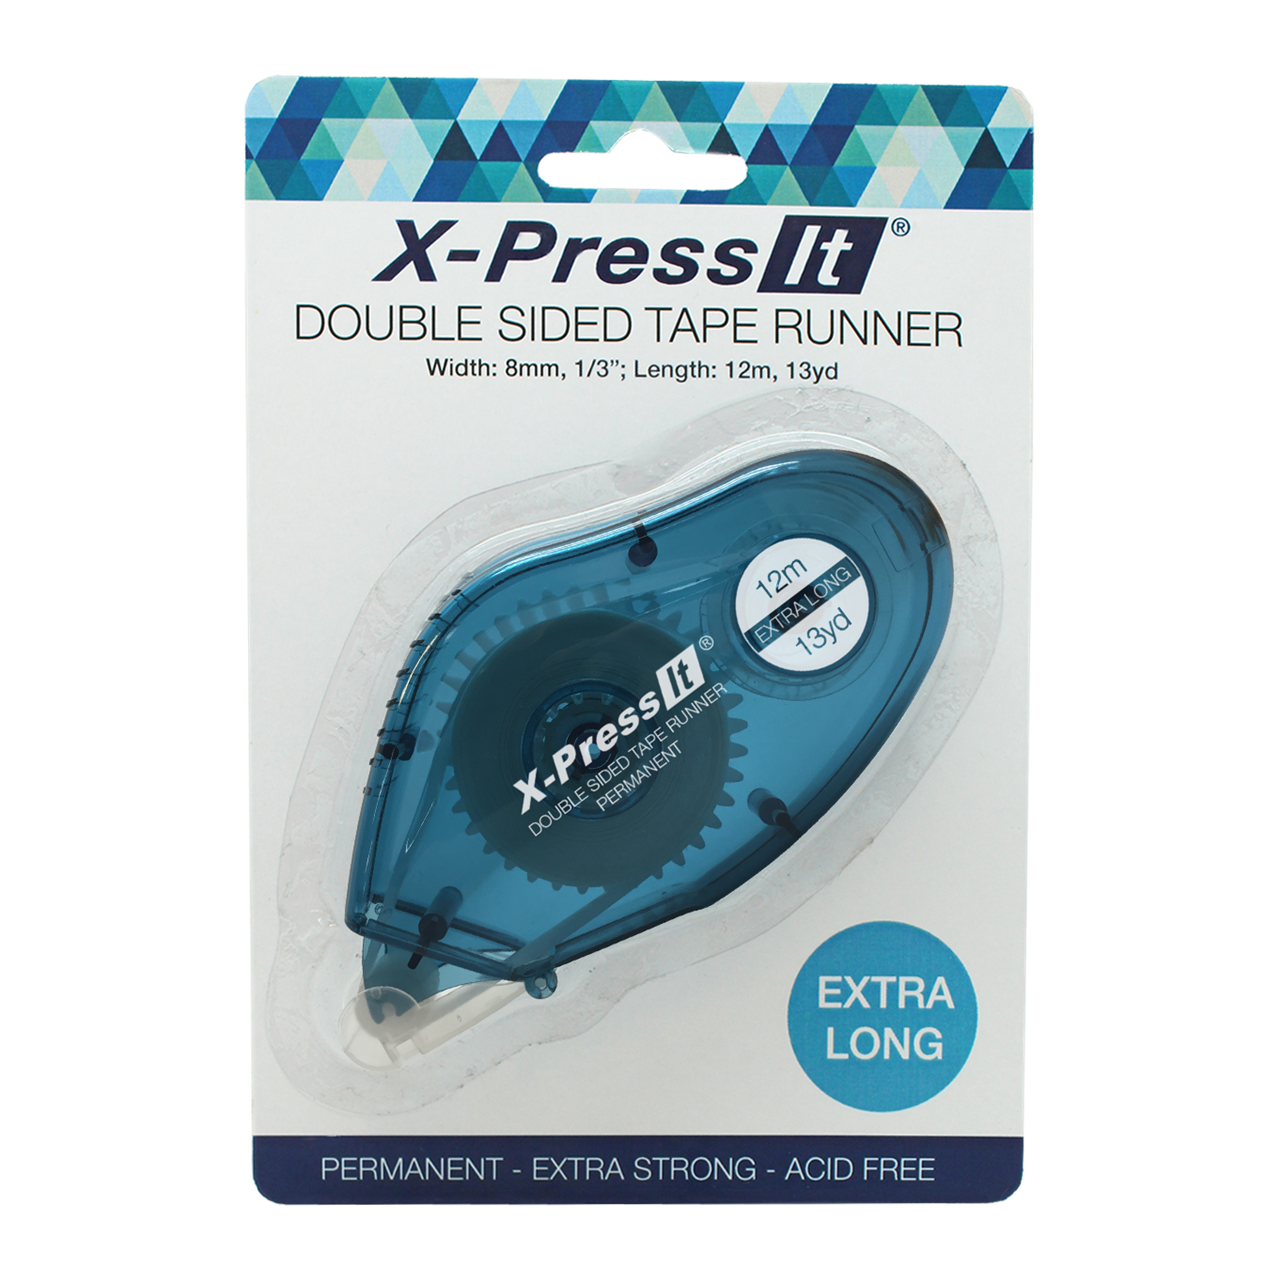 X-Press It Double Sided Tape Runner 8mm x 12m